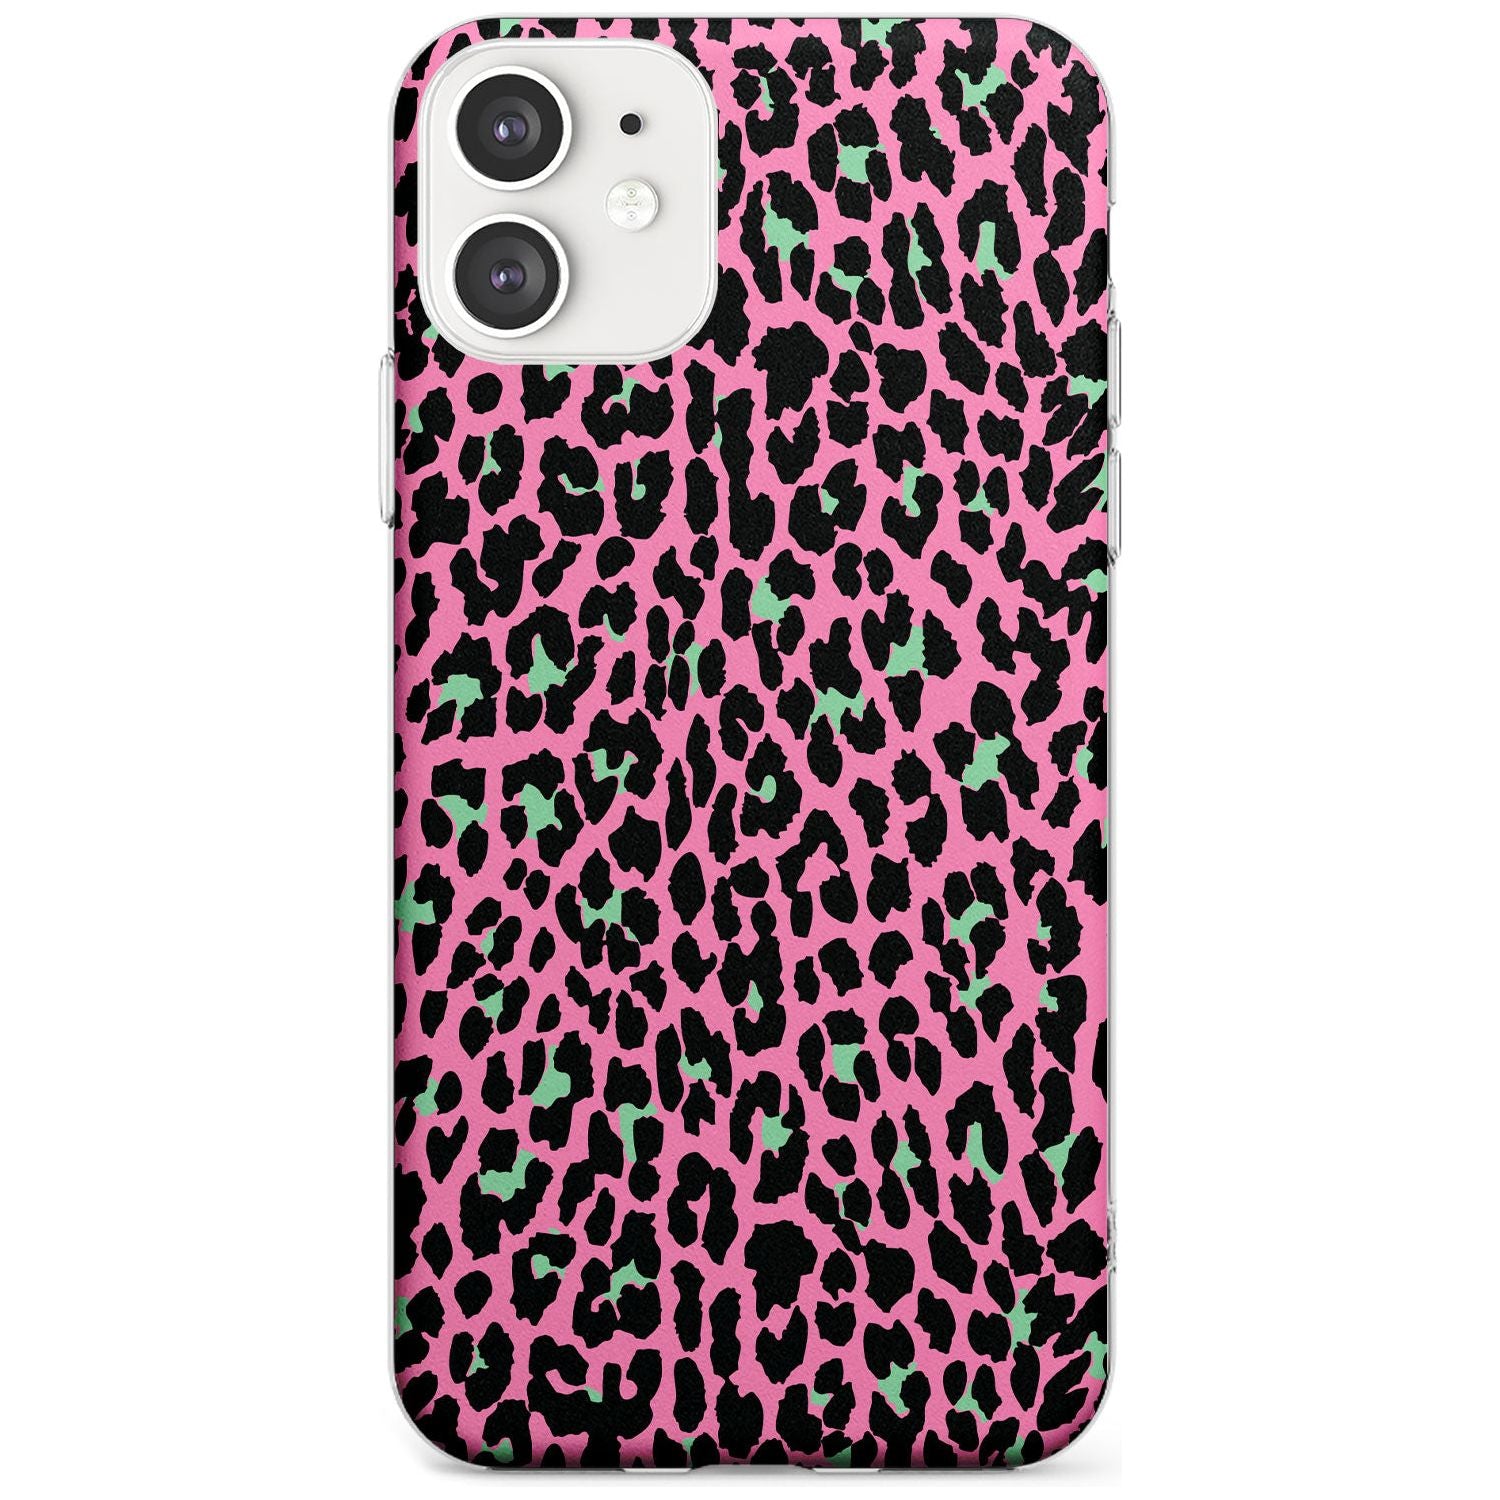 Green on Pink Leopard Print Pattern Slim TPU Phone Case for iPhone 11